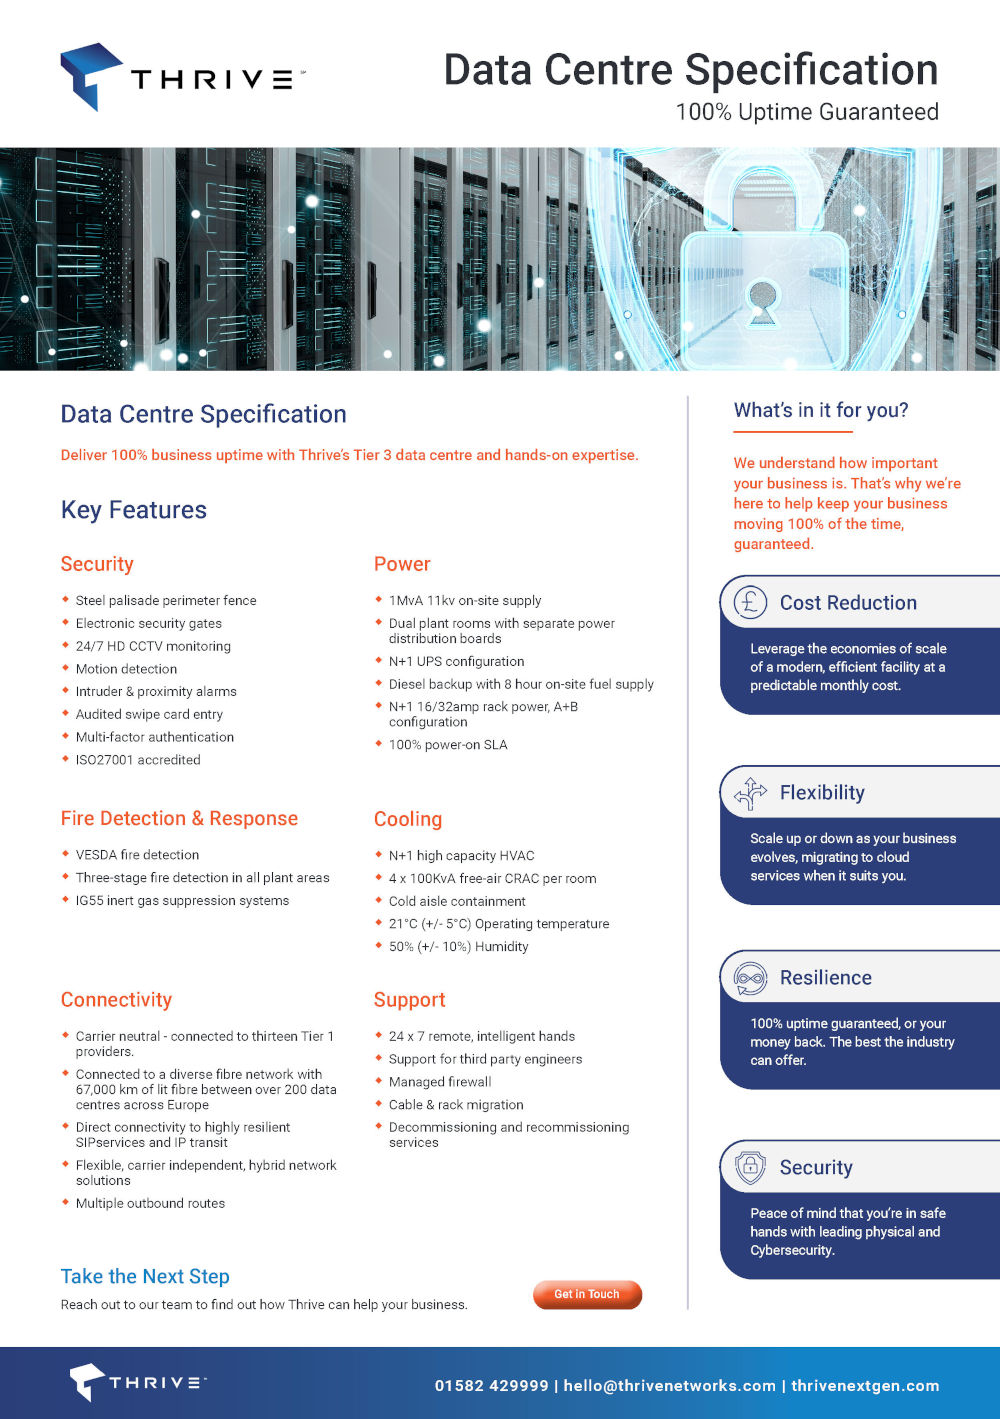 Thrive Data Centre Specification UK cover